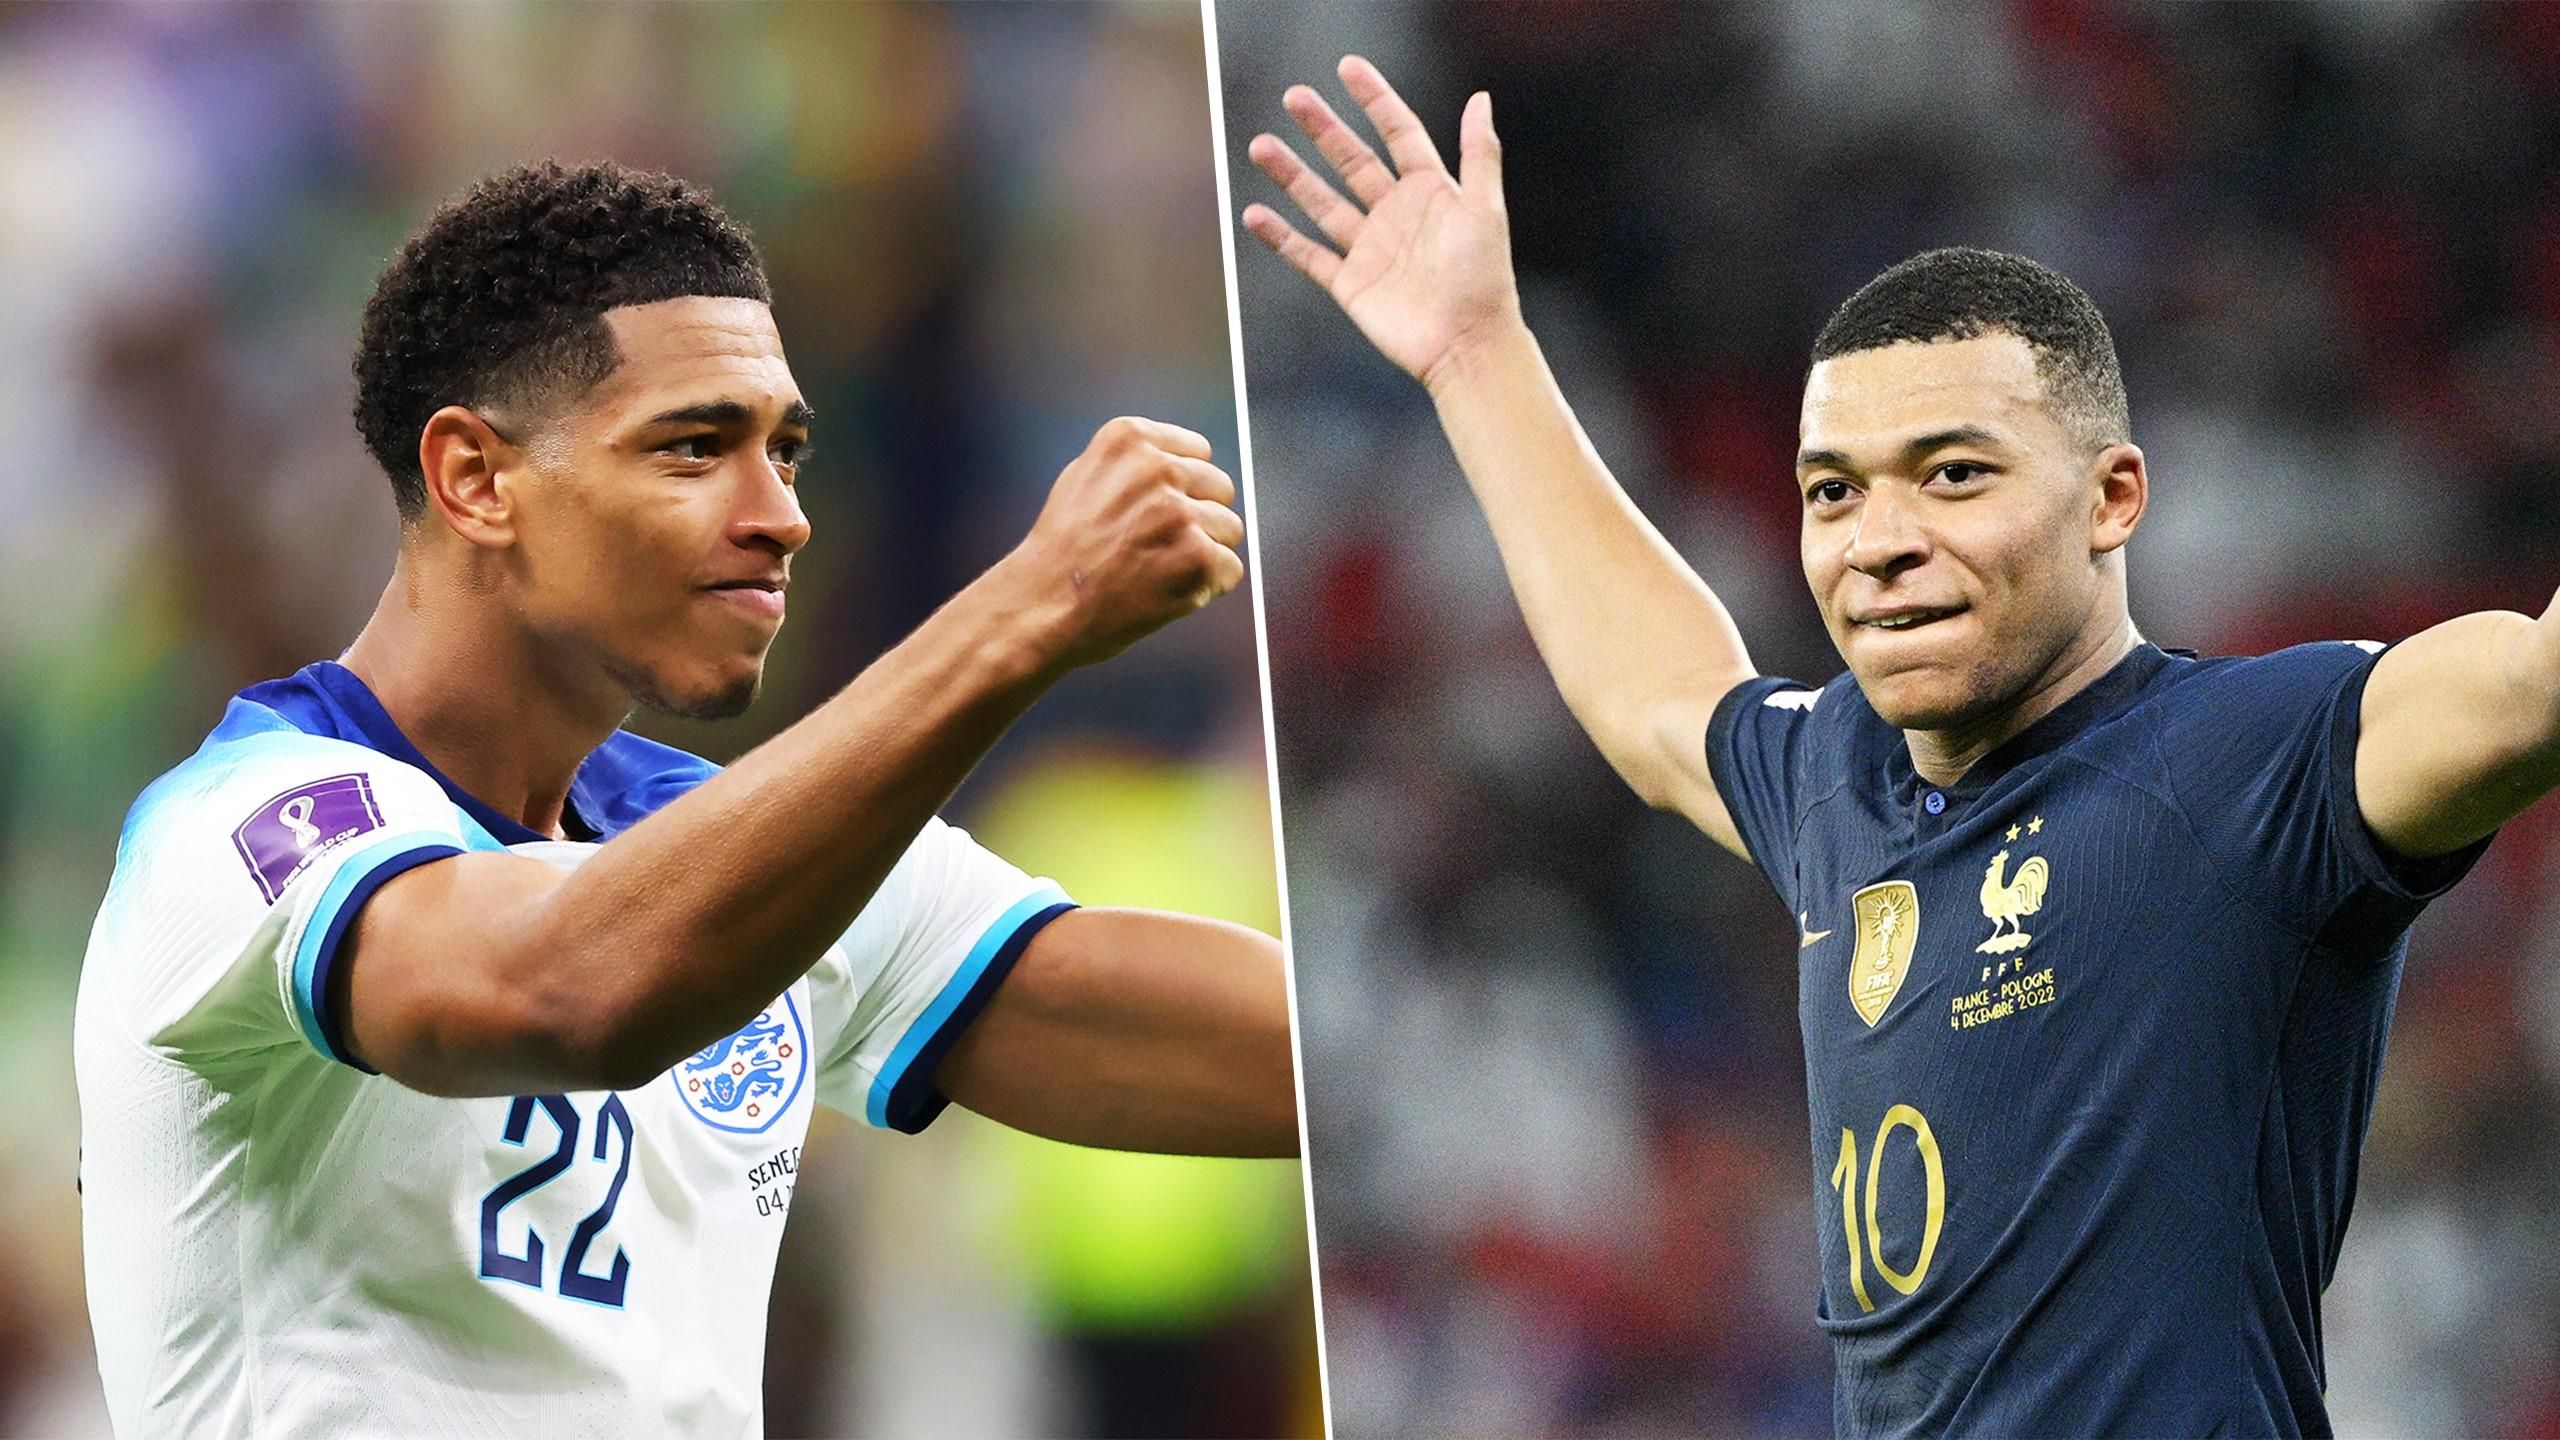 England v France The key battles that could decide the big World Cup 2022 quarter-final clash in Qatar